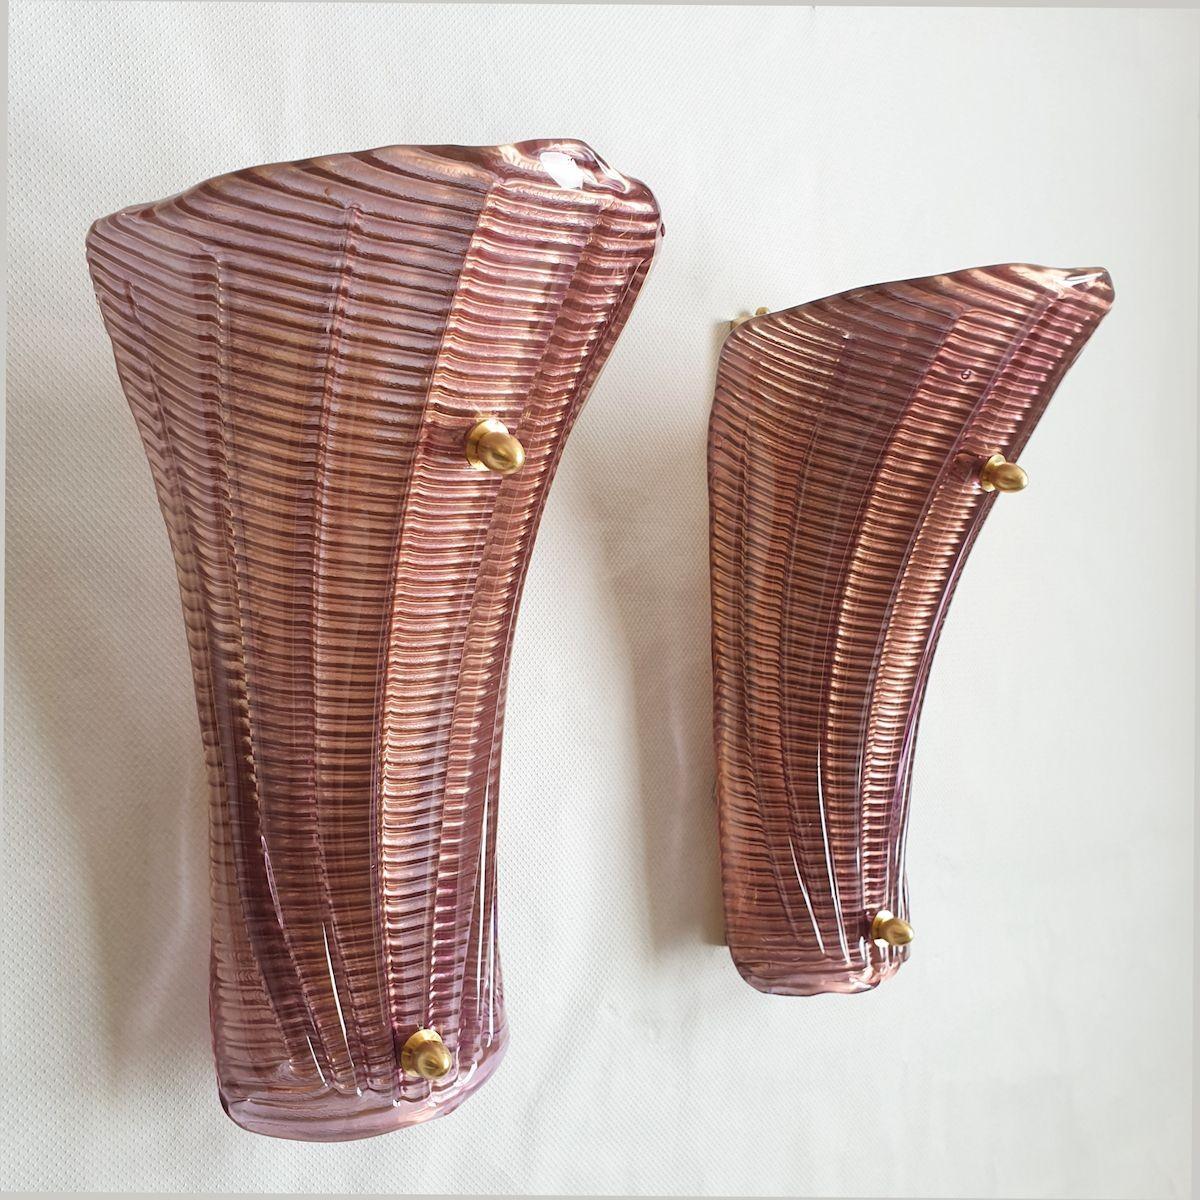 Pair of large Purple Mid-Century Modern Murano glass sconces, attributed to Mazzega, Italy 1980s.
The sconces have brass fittings, with one light bulb each.
The pair has been rewired for the US.
The Murano glass has a regular pattern; it's purple